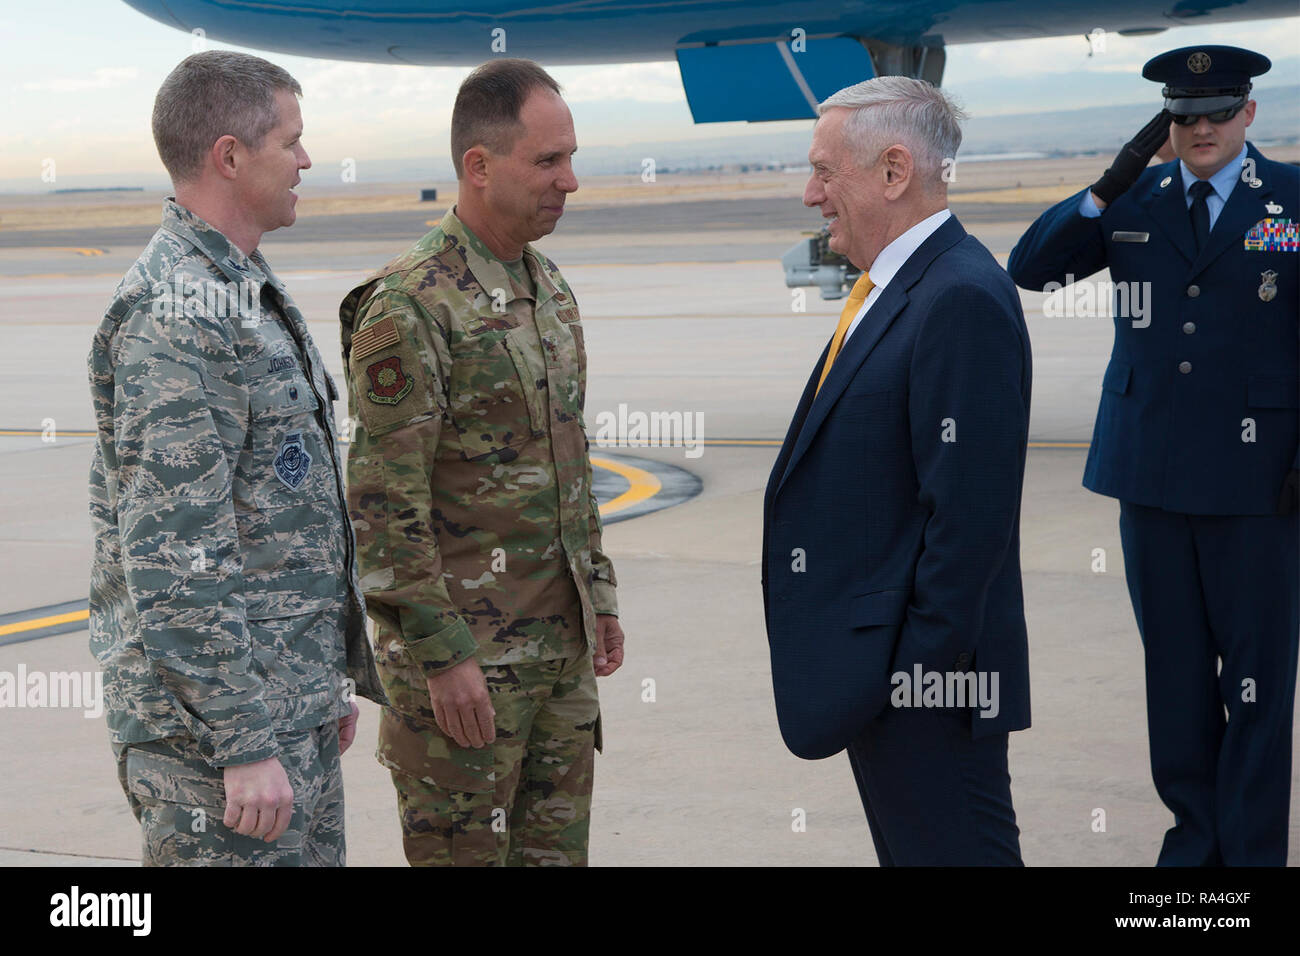 PETERSON AIR FORCE BASE, Colo. – (From left to right) Col. Sam Johnson, 21st Space Wing vice commander, and Maj. Gen. John Shaw, Air Force Space Command deputy commander, greet Defense Secretary James Mattis on the flight line at Peterson Air Force Base, Colo., Nov. 30, 2018. Mattis was in Colorado Springs to meet with senior cadets at the U.S. Air Force Academy. (U.S. Air Force photo by Robb Lingley) Stock Photo